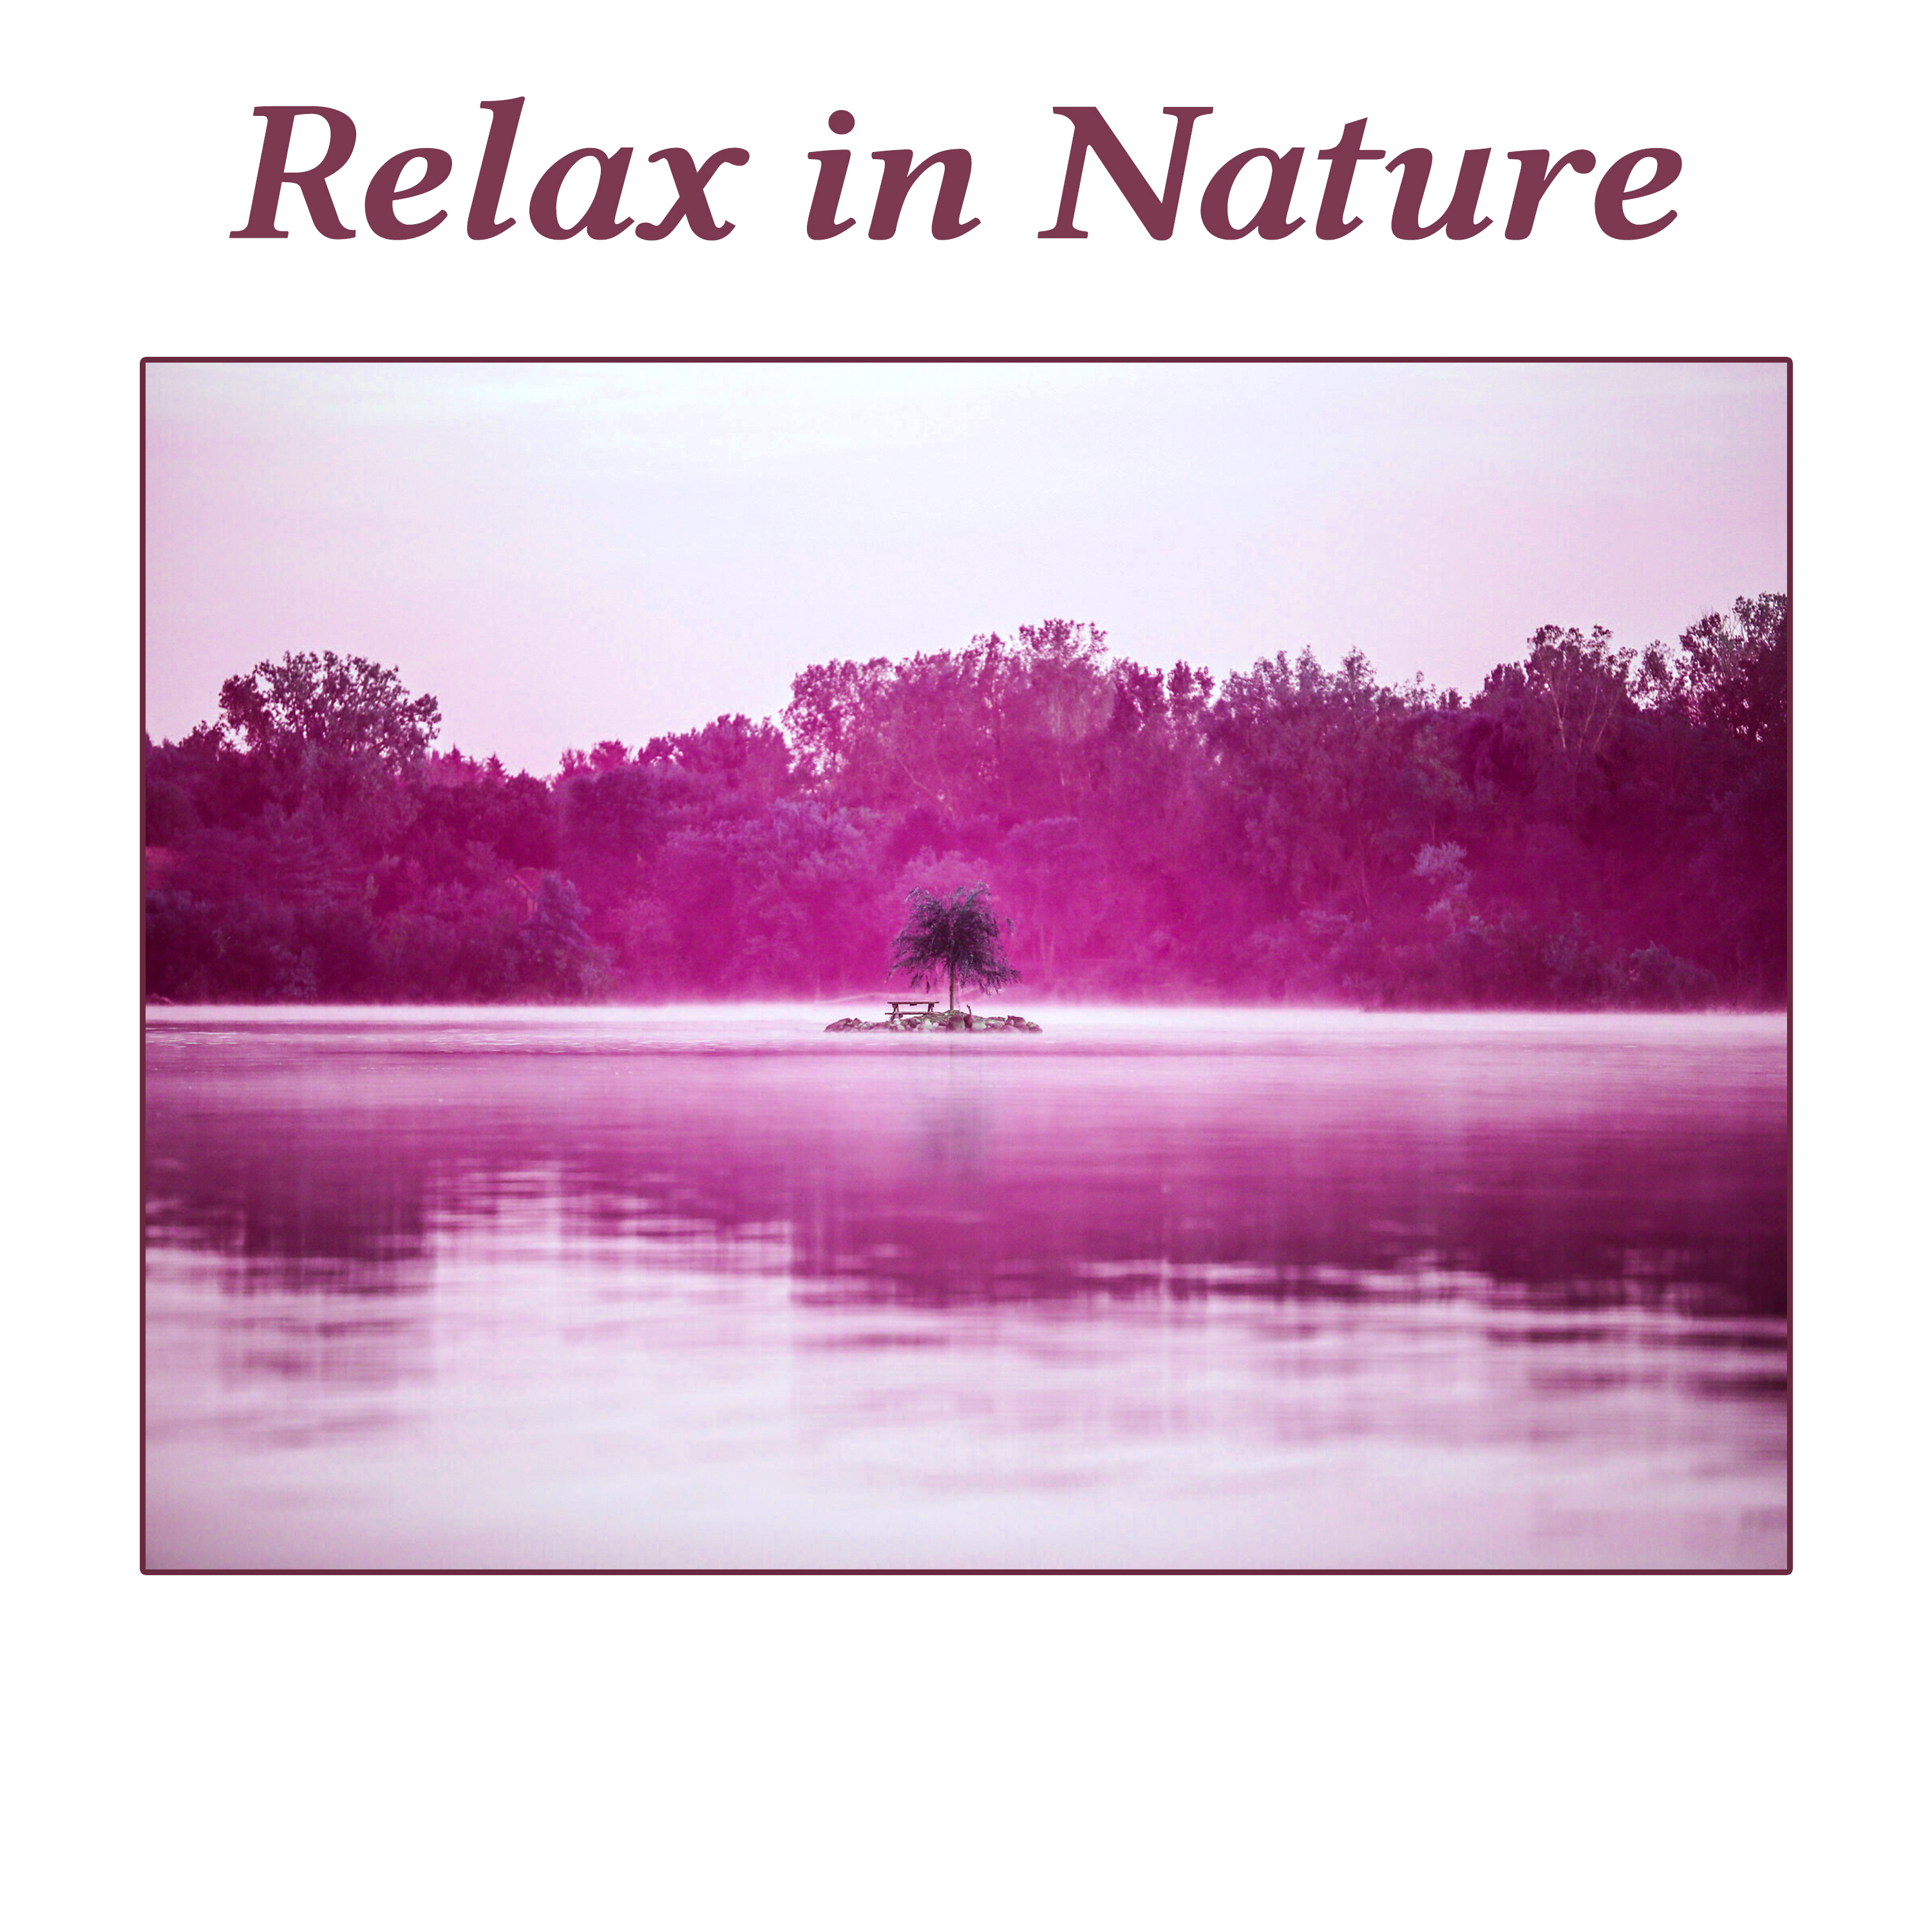 Relax in Nature – Beautiful Nature Sounds of Birds and Ocean Waves, Deep Relaxing Music, Peaceful Sounds of New Age Music for SPA, Wellness